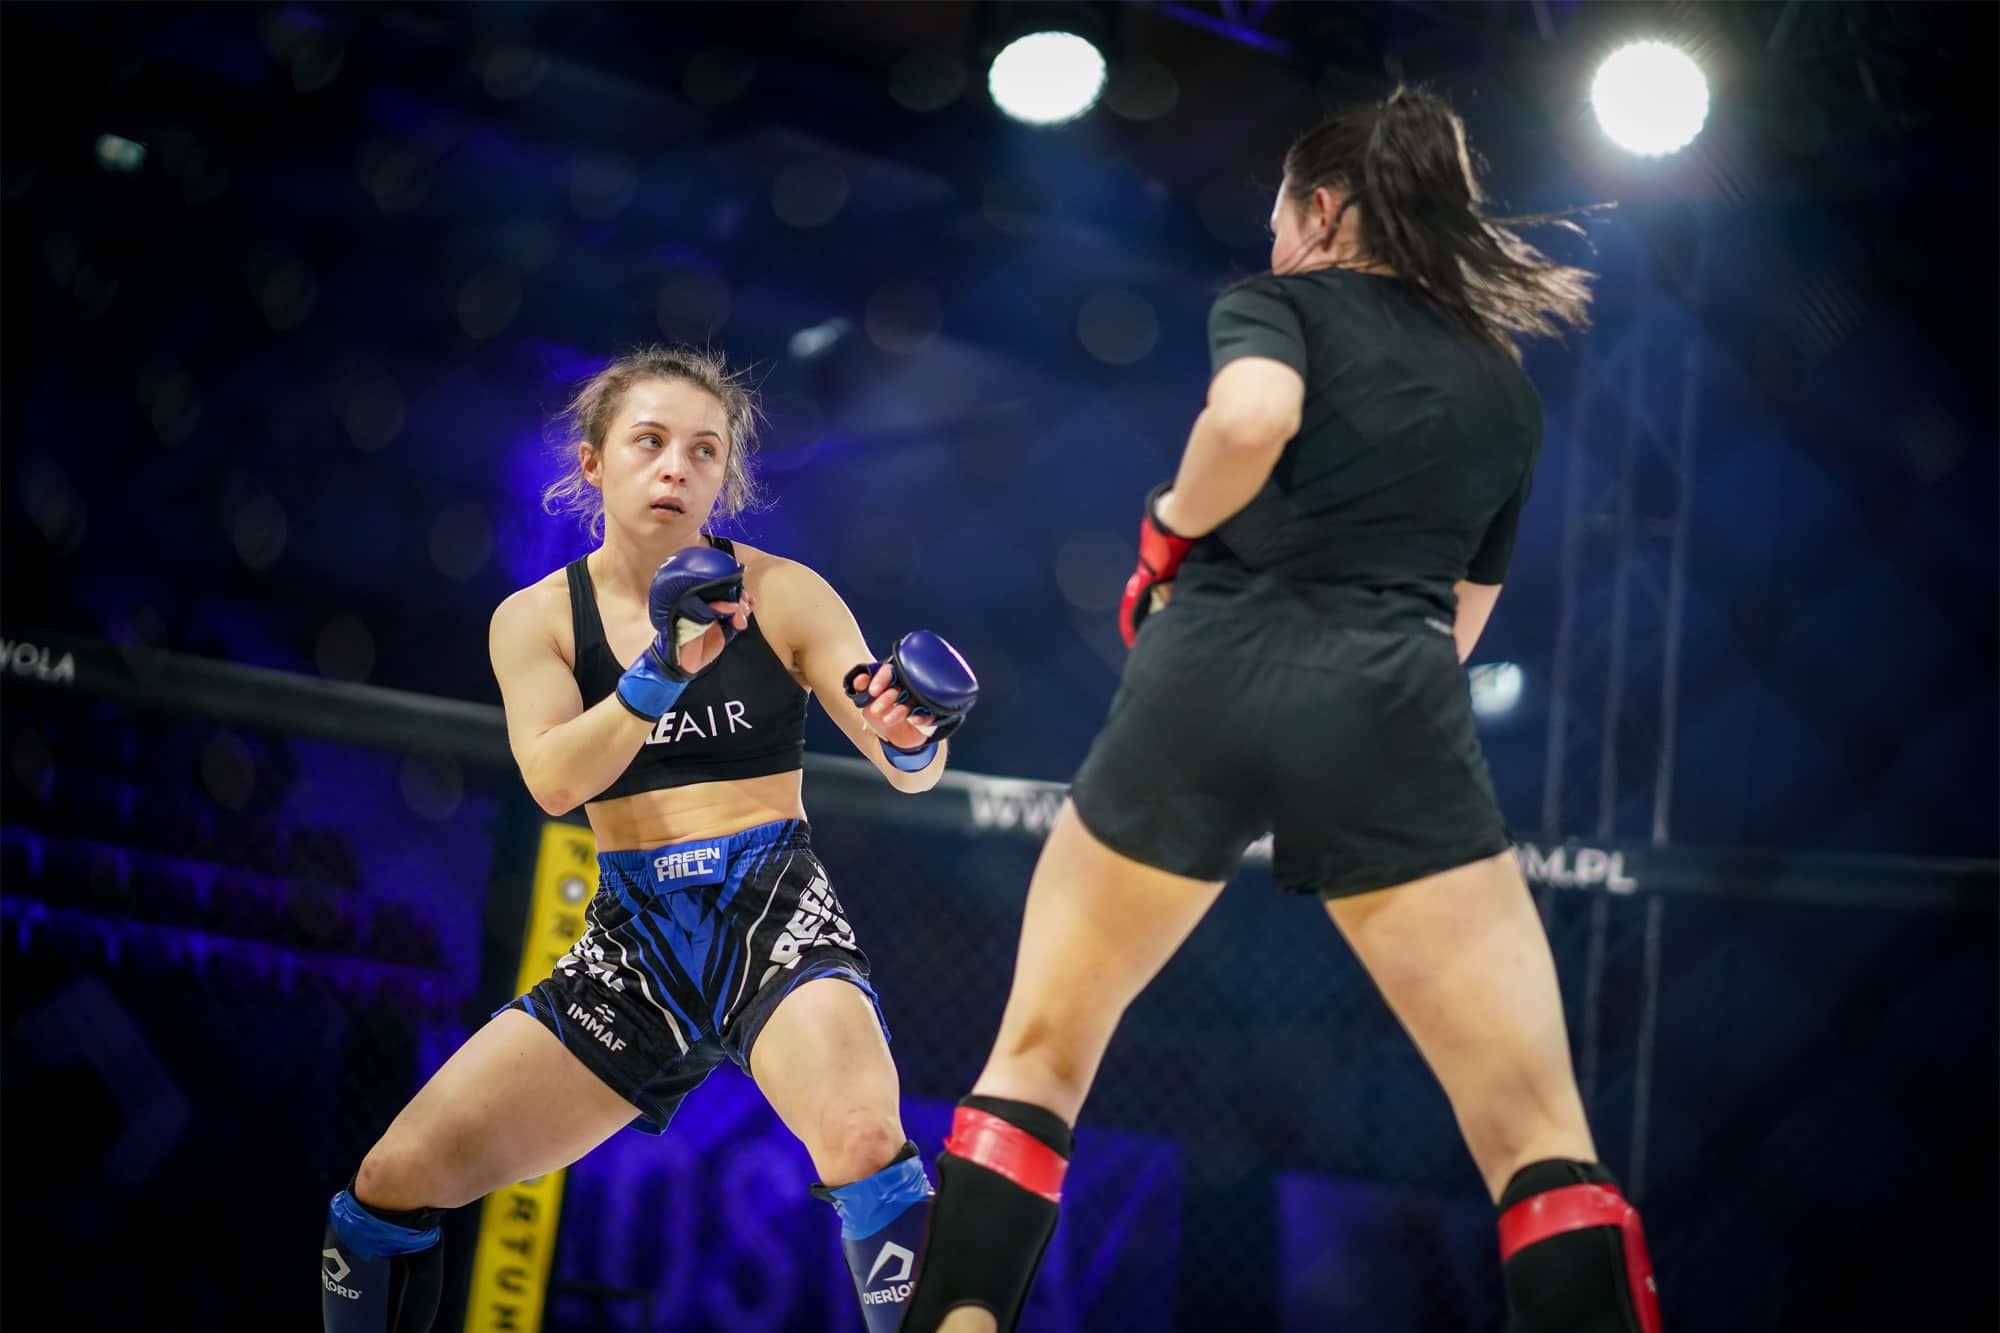 Historic MMA Polska Championships See Record Number of Entries